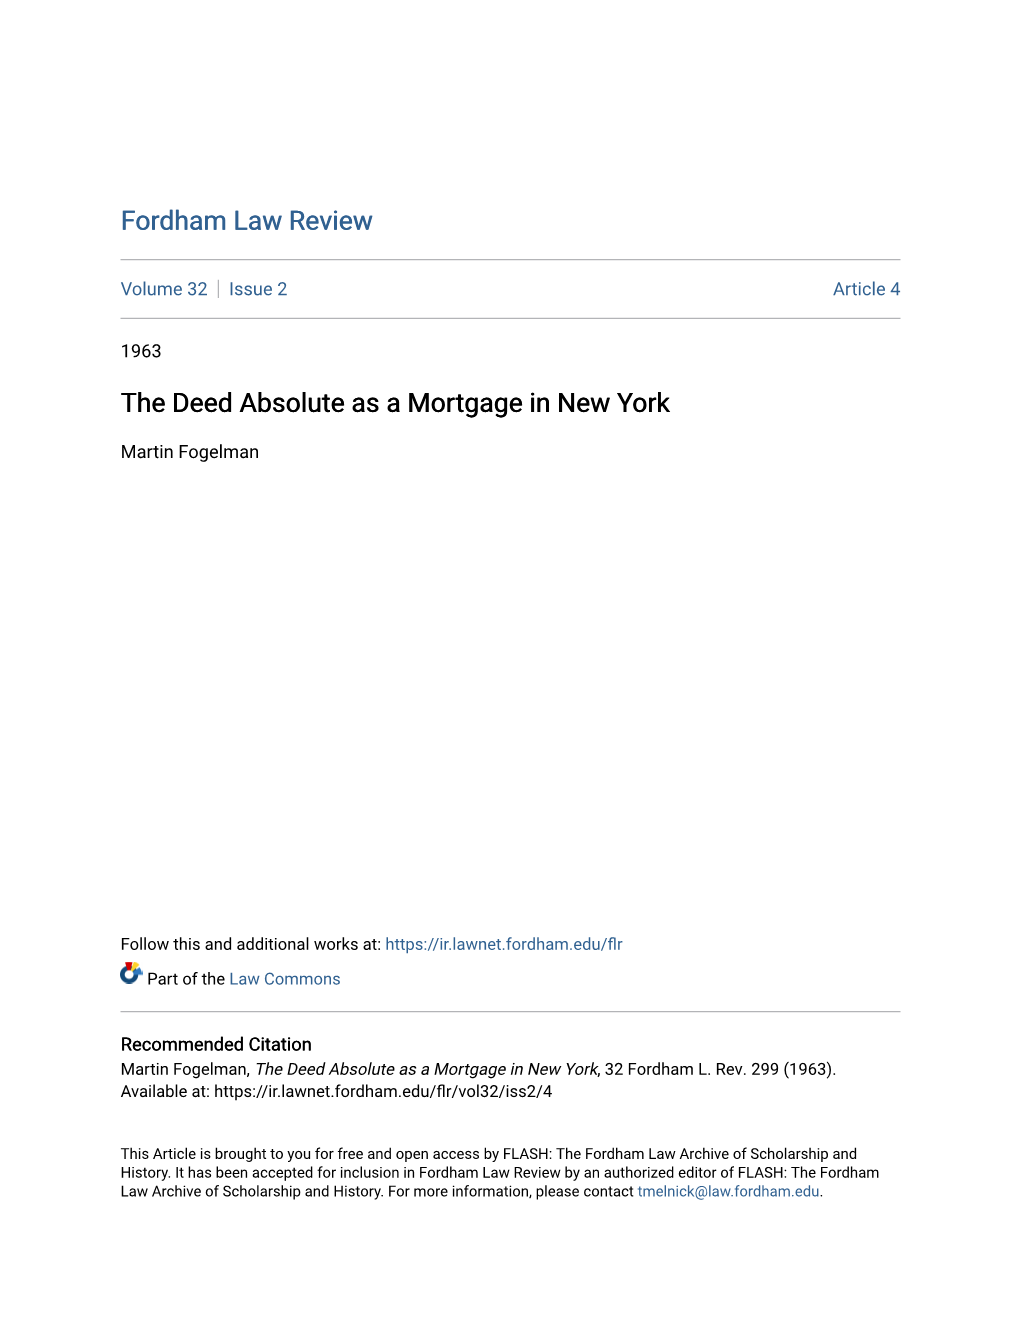 The Deed Absolute As a Mortgage in New York